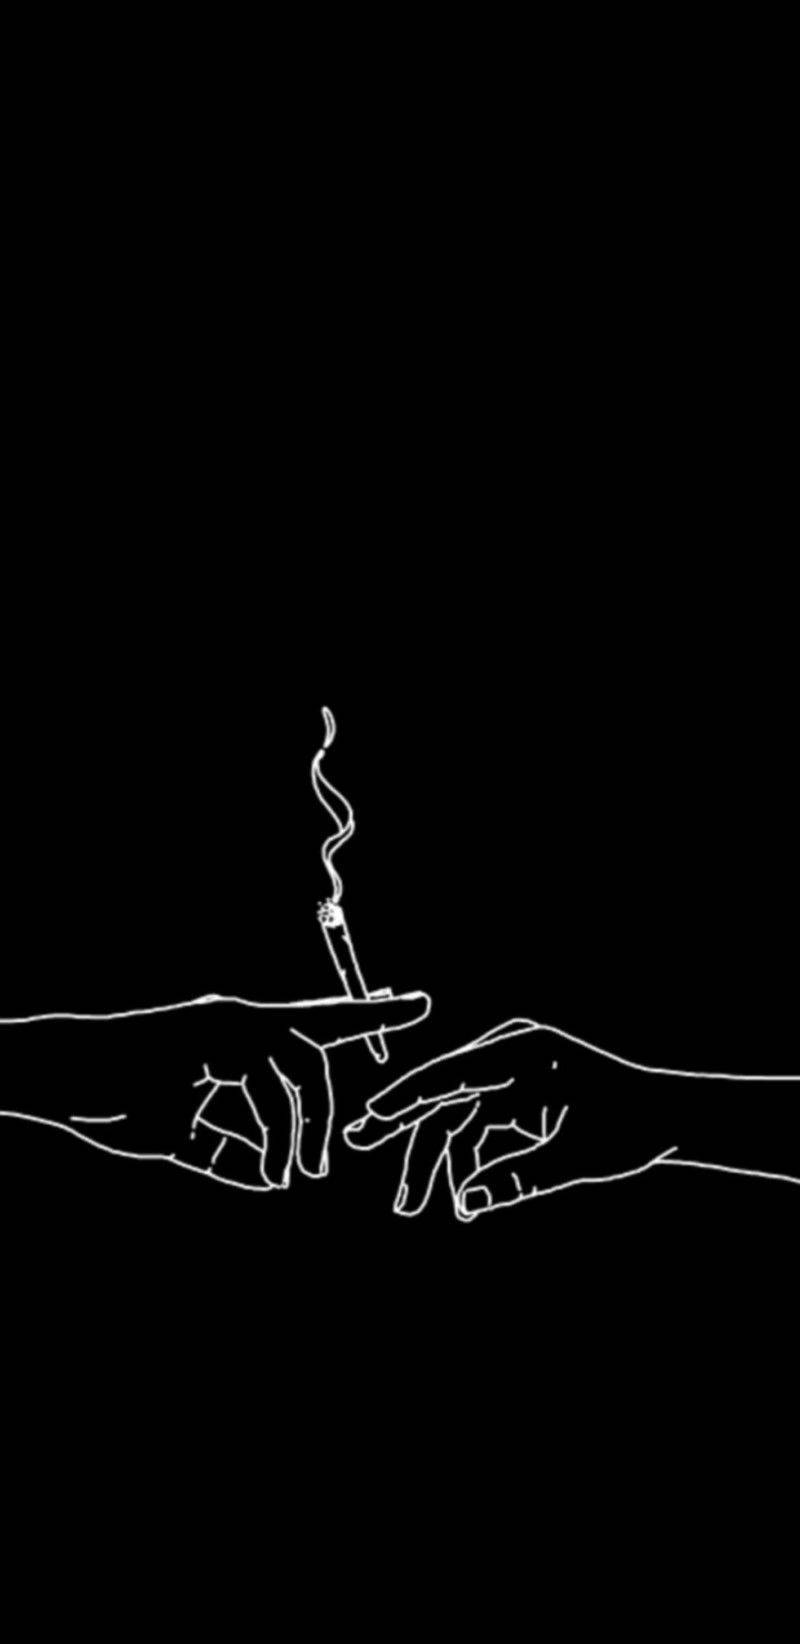 Cute Black And White Aesthetic Sharing Cigarette Background